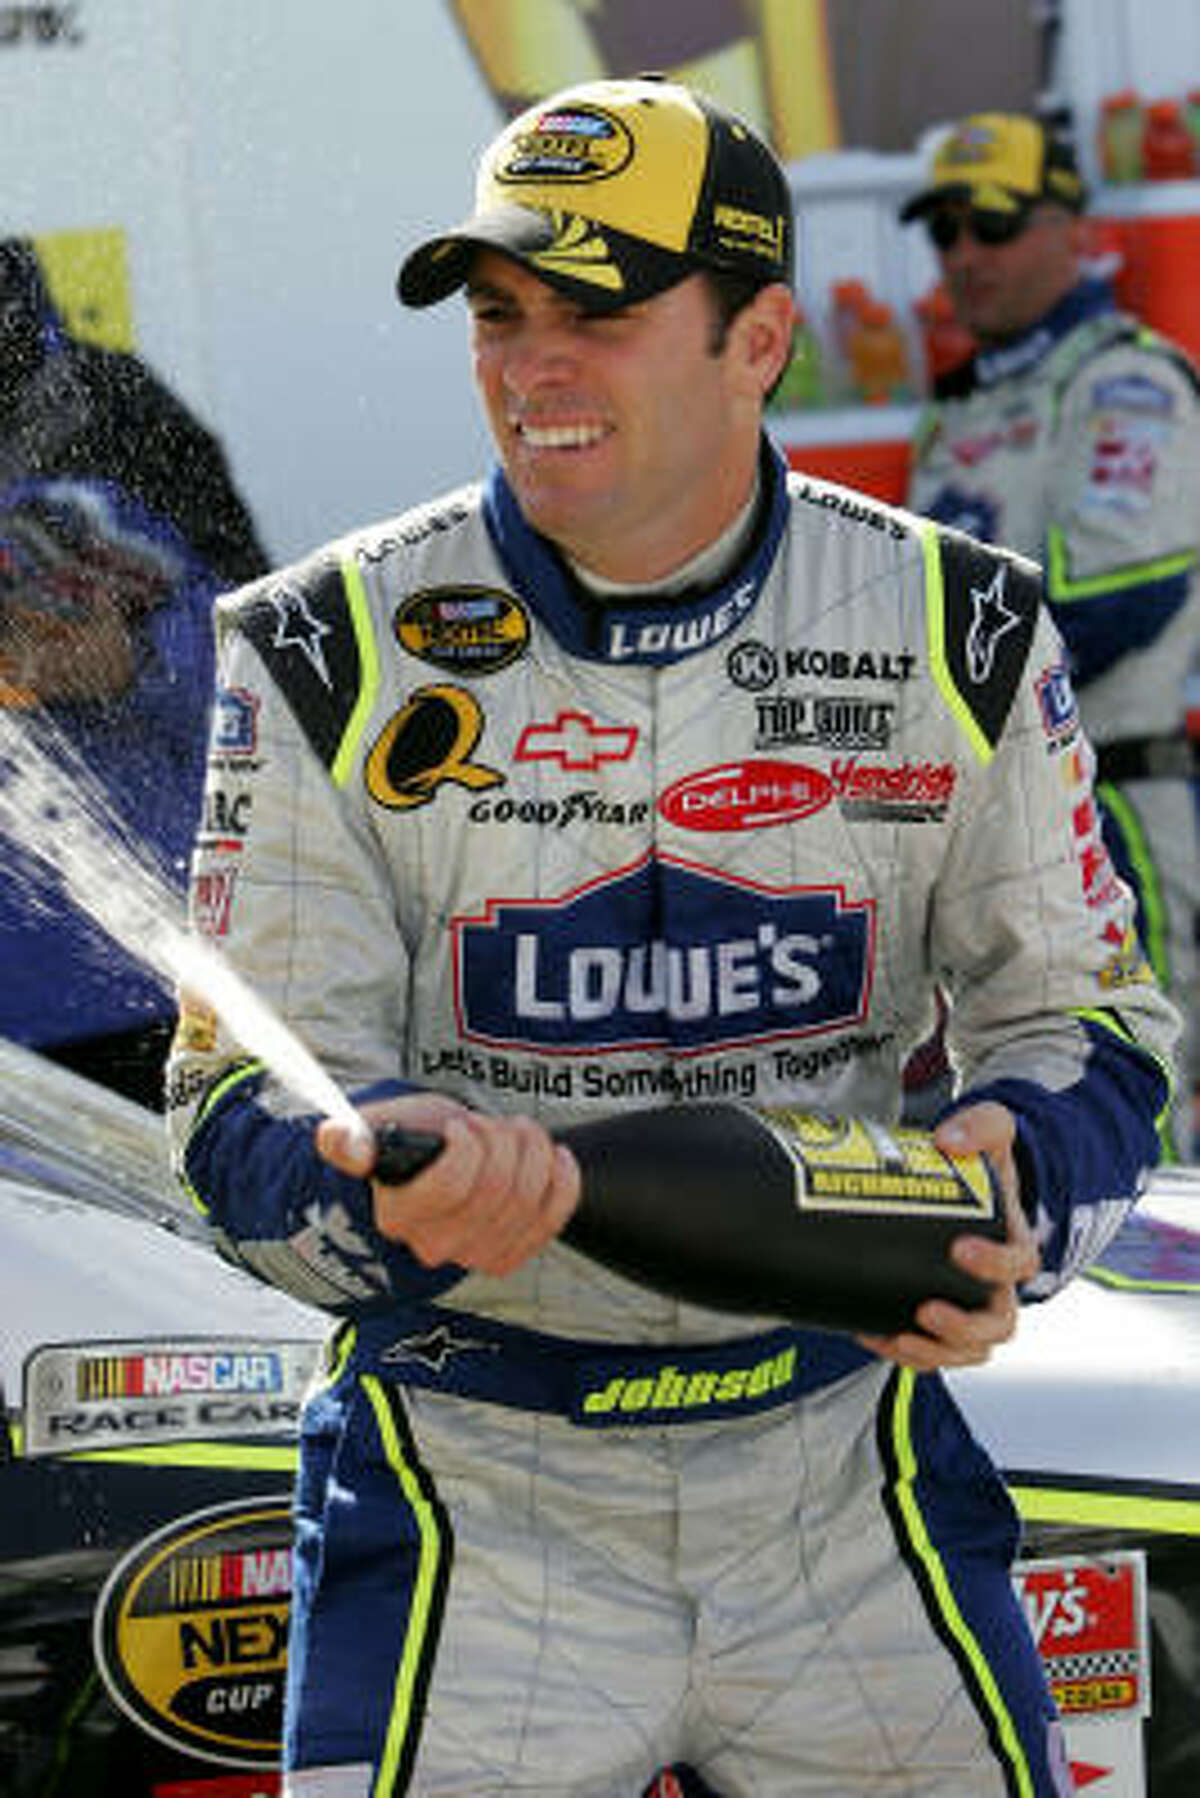 With Sunday's victory, Jimmie Johnson gave Hendrick Motorsports its seventh win in the past eight Nextel Cup races.